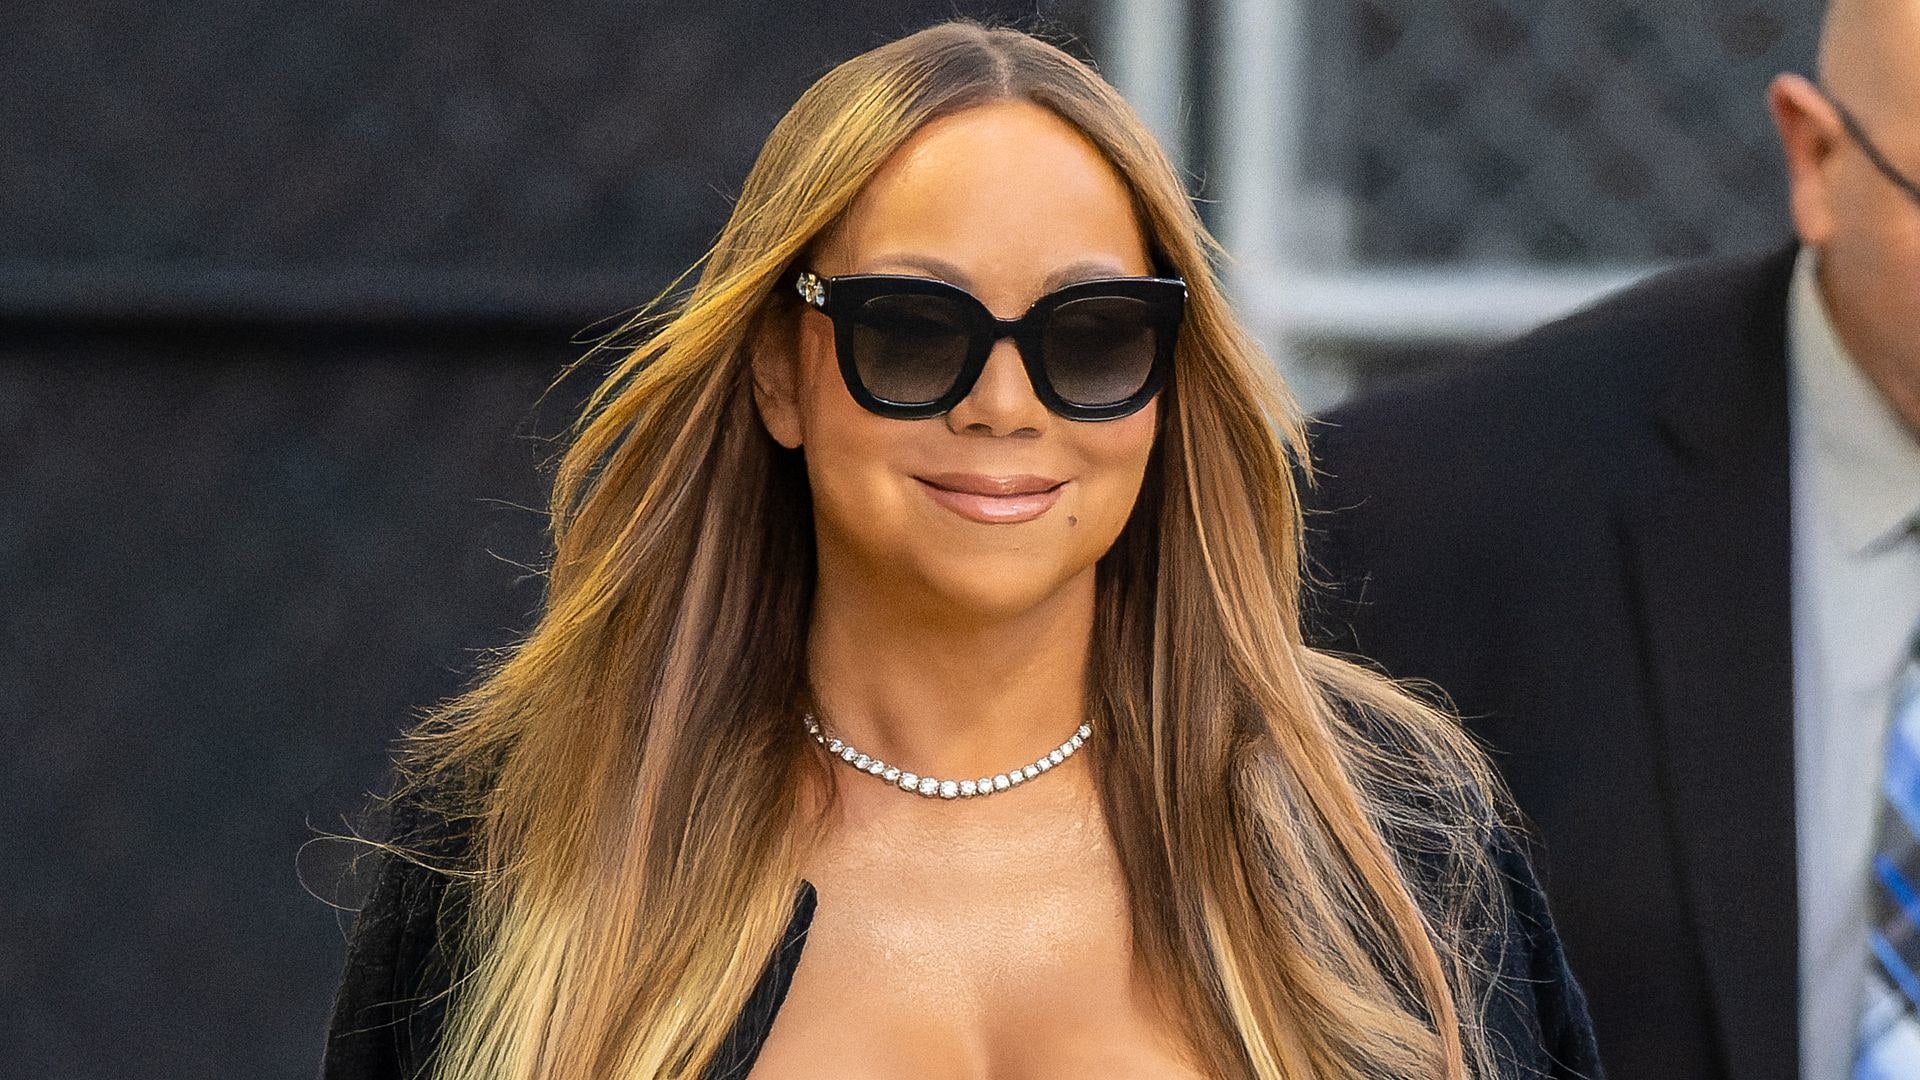 Mariah Carey smiling and wearing sunglasses with hair down loose leaving Jimmy Kimmel